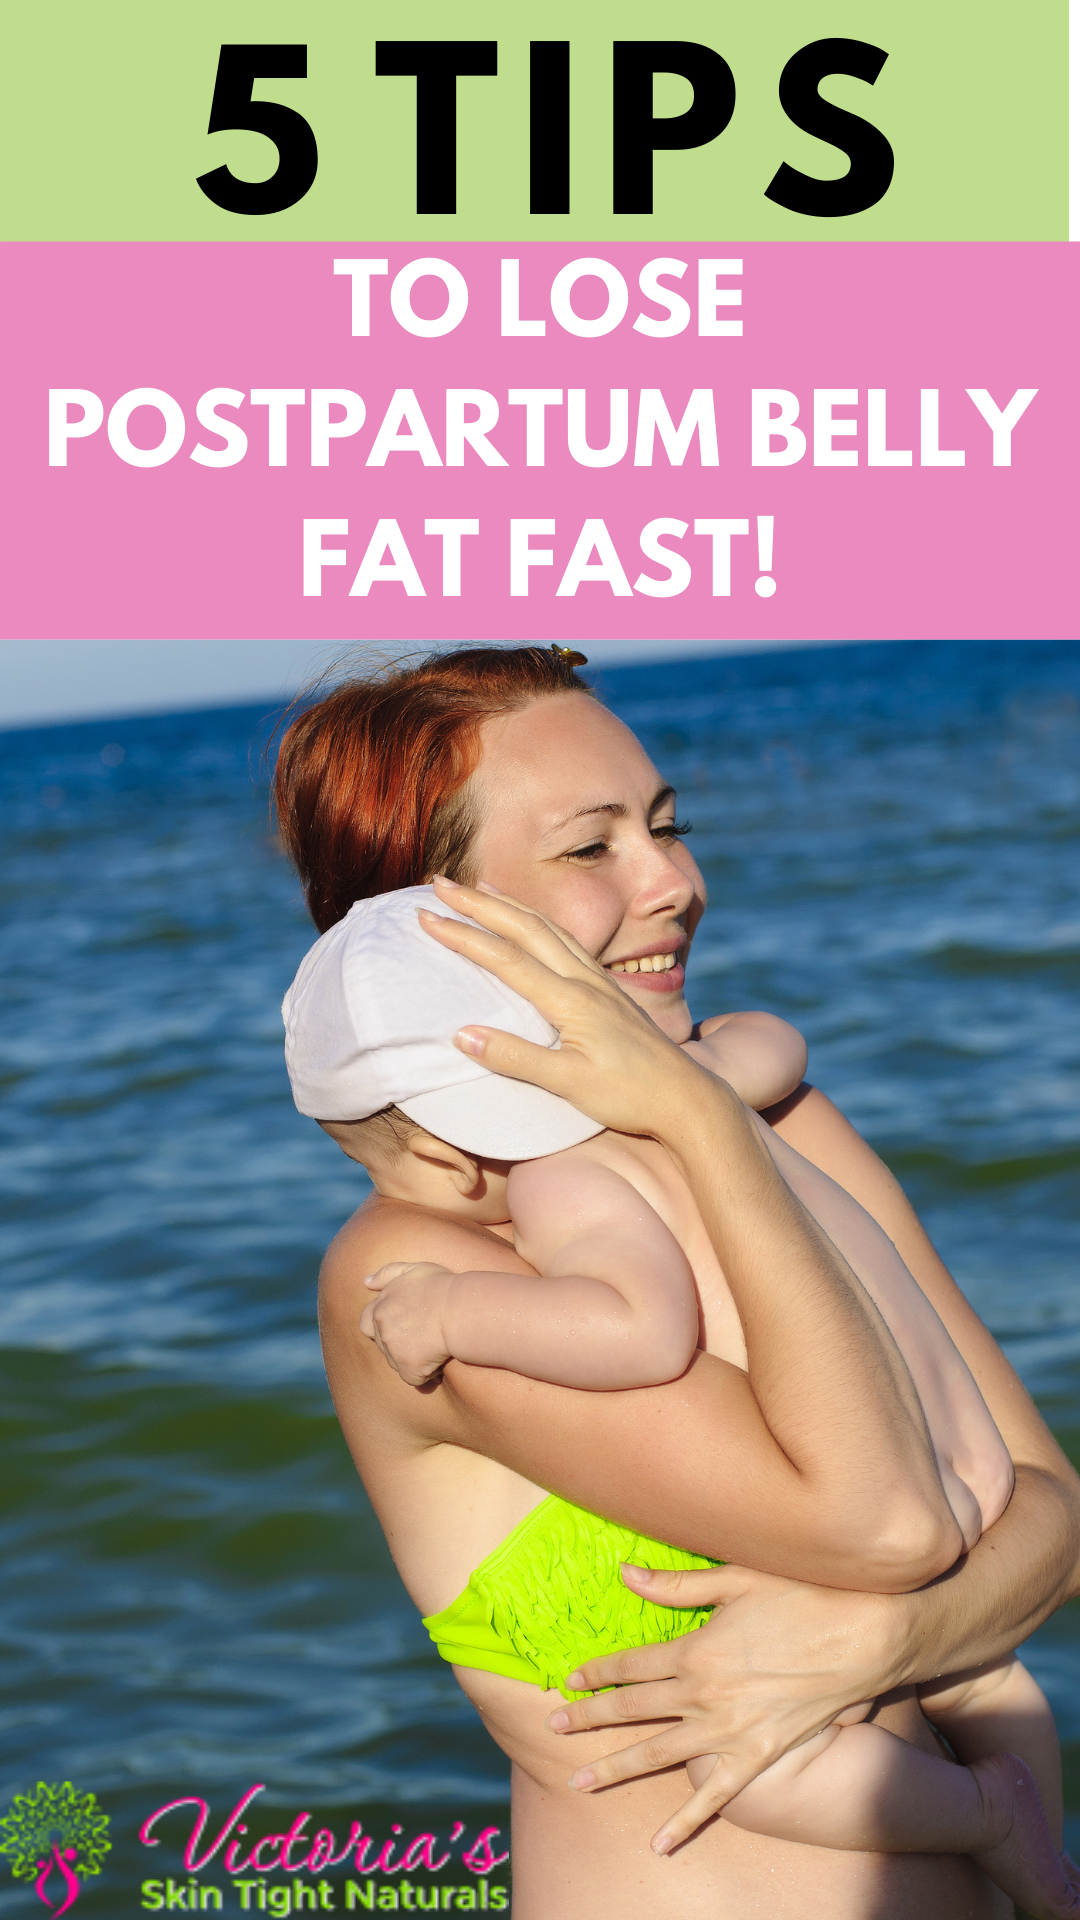 How To Lose Postpartum Belly Fat